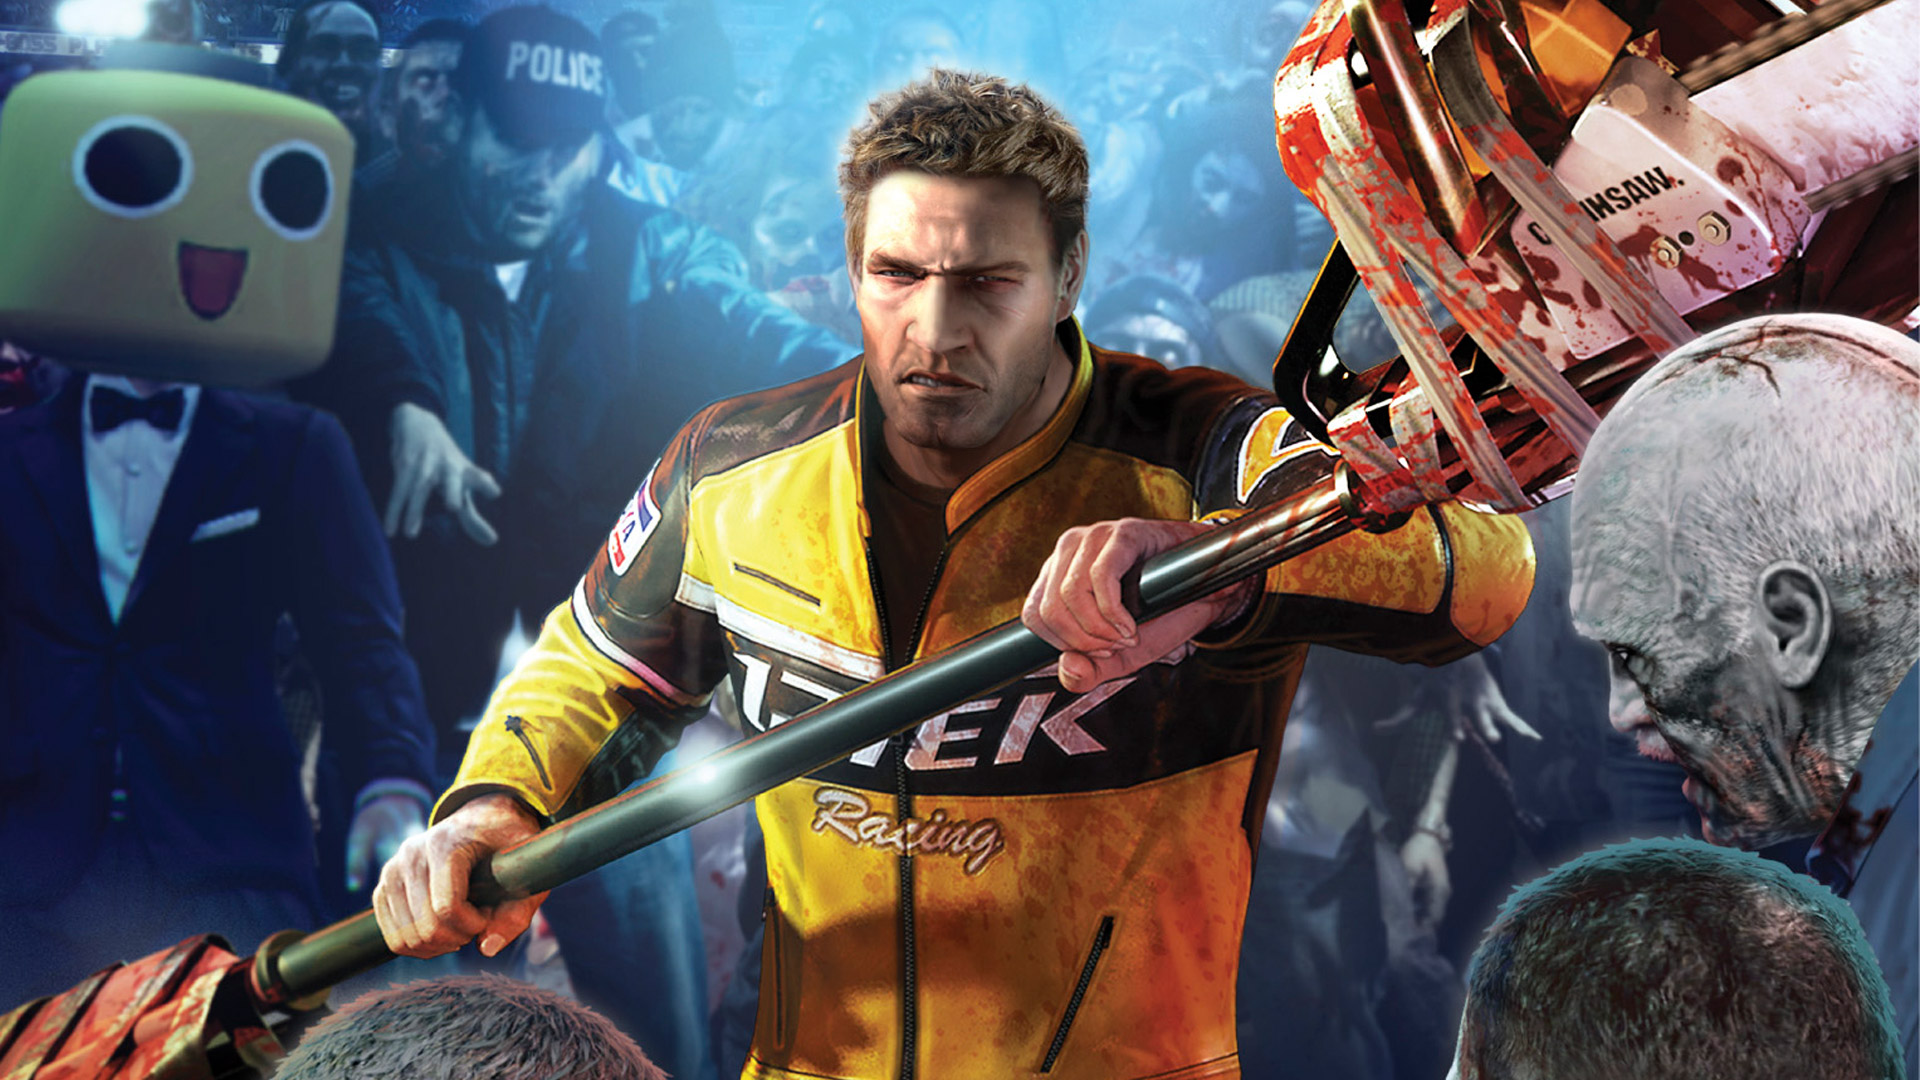 Dead Rising 2: Off the Record Review - GameSpot